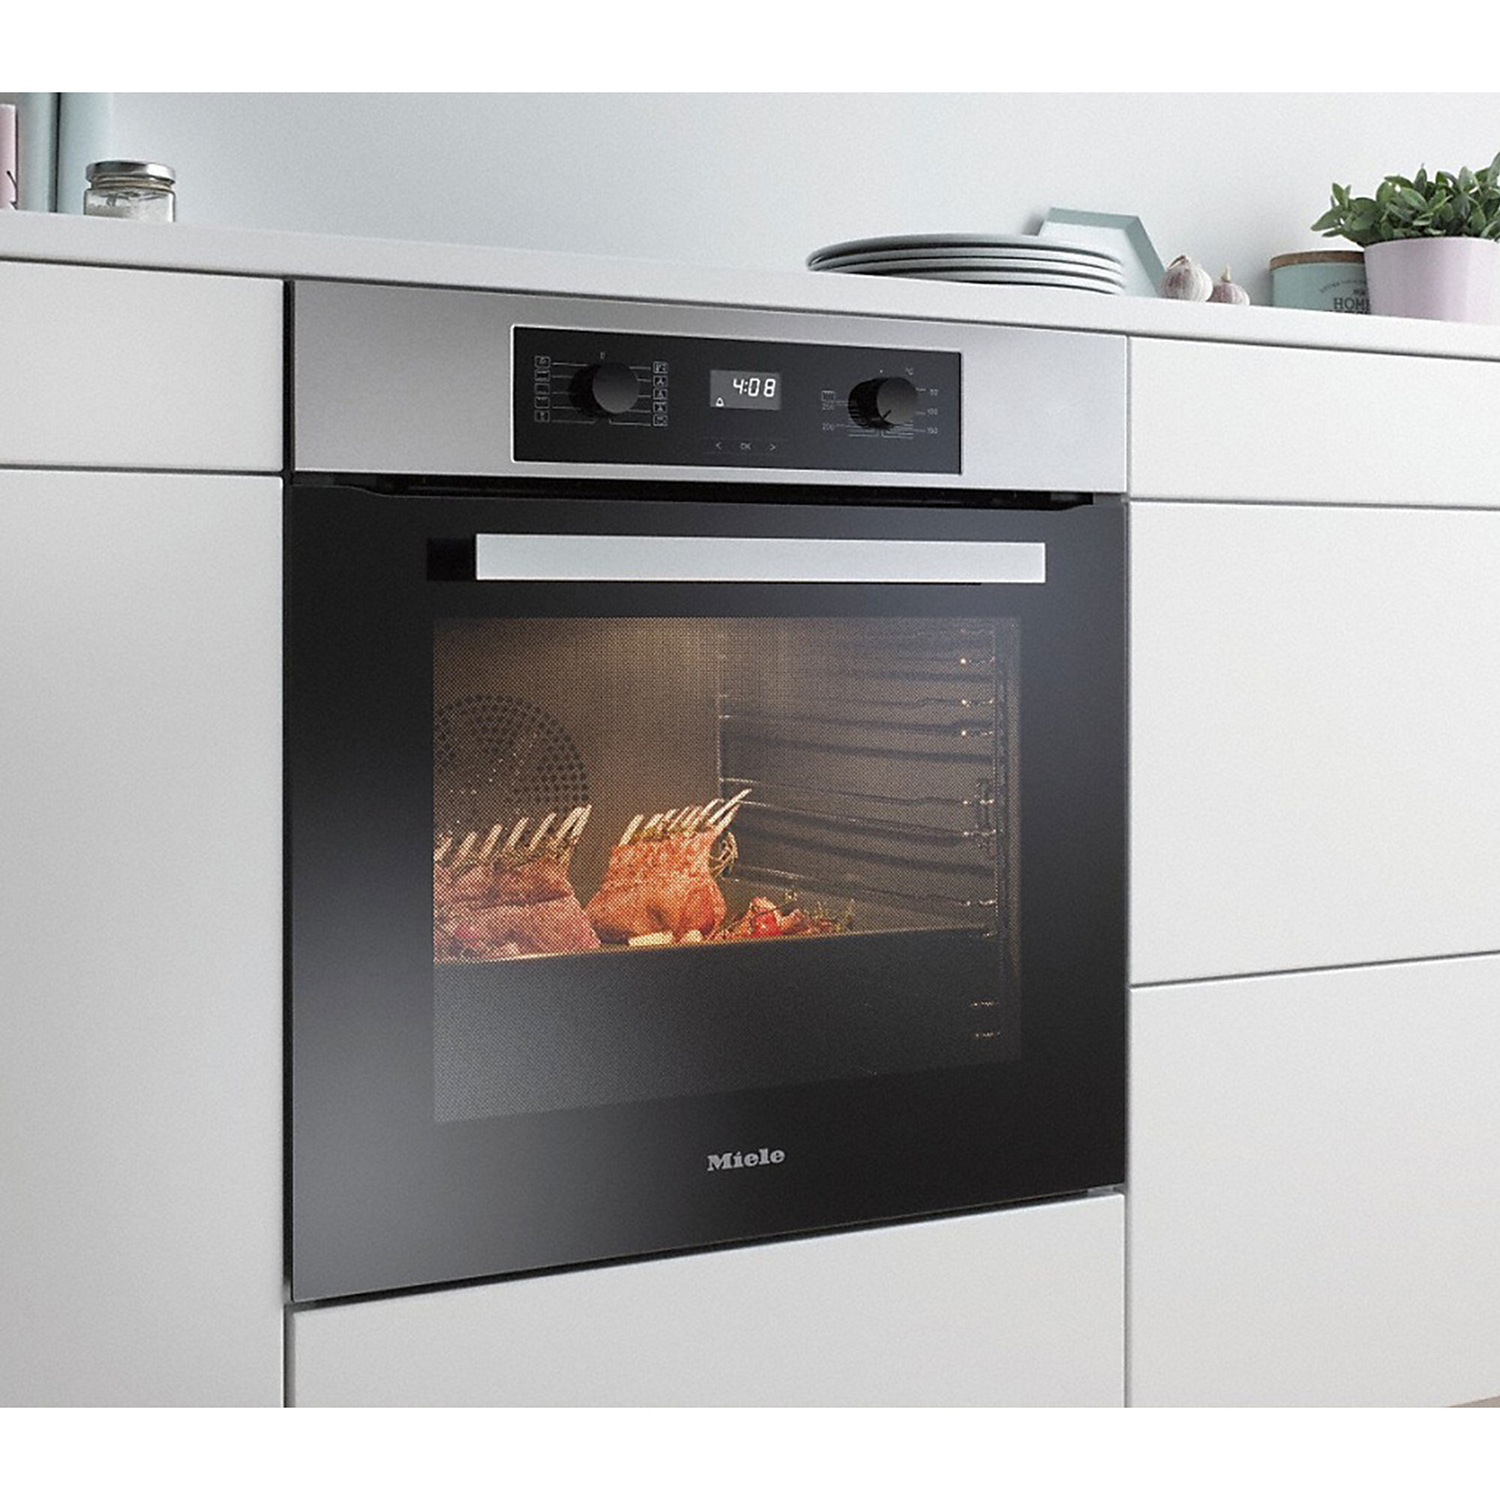 Built In Large Capacity A+ Rated Single Oven